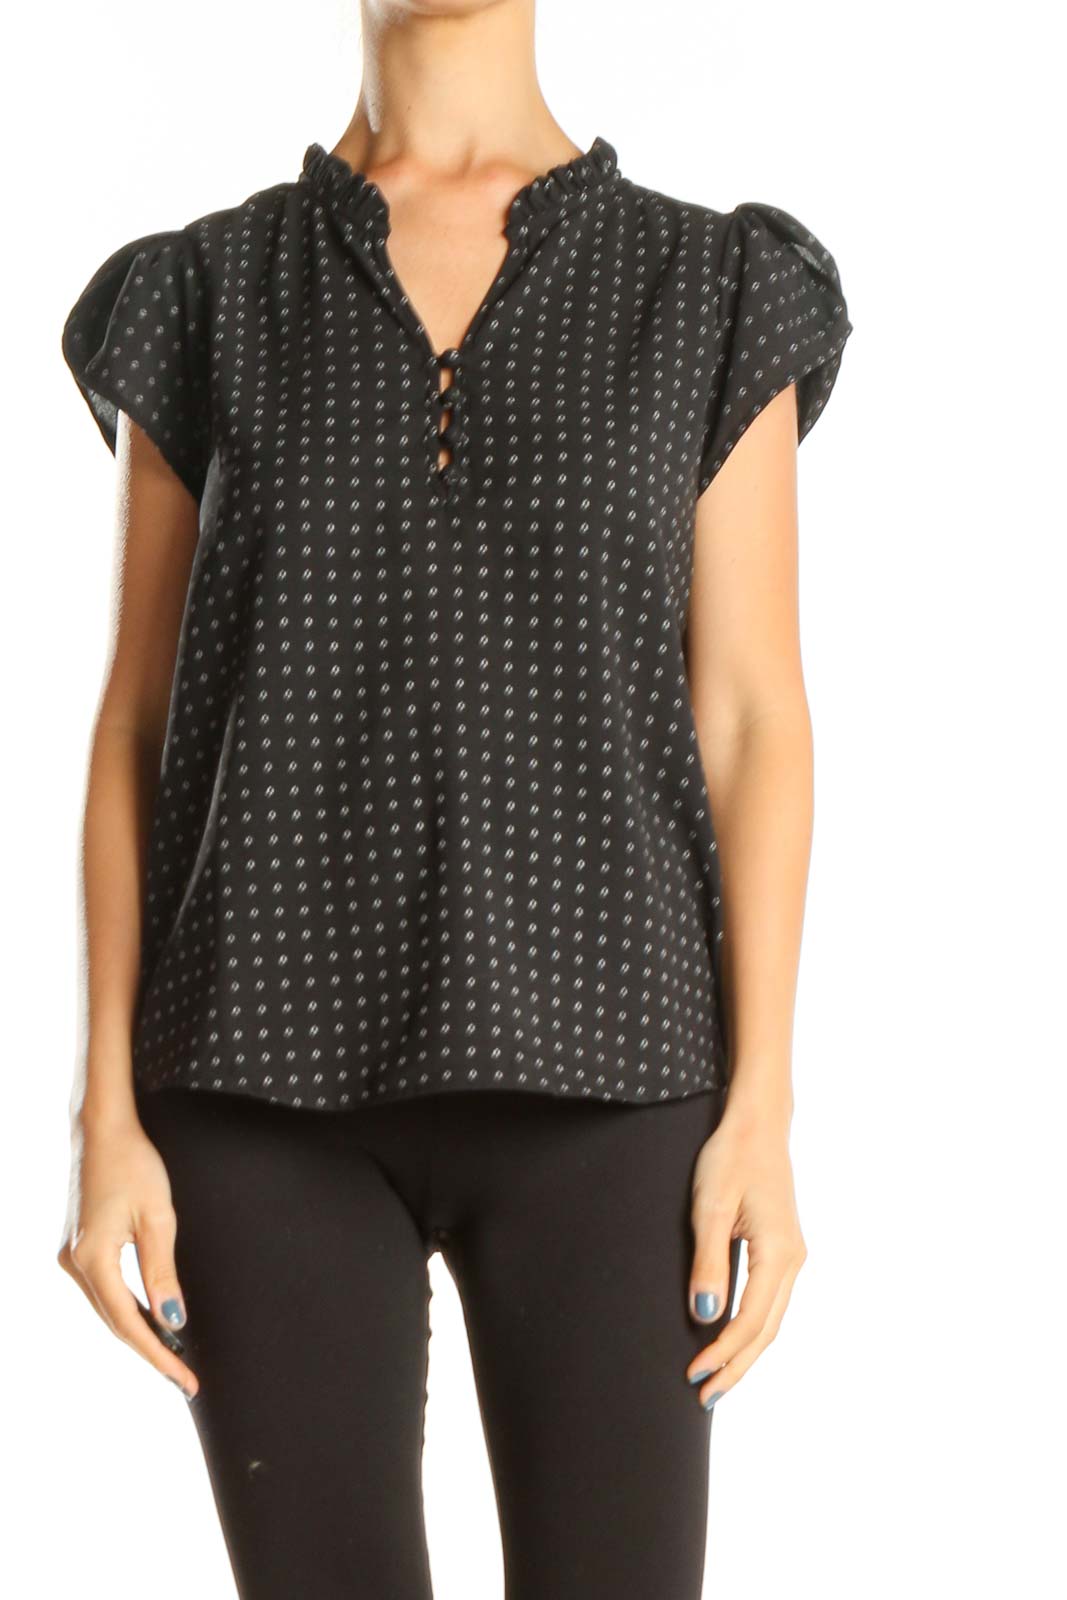 Black Polka Dot All Day Wear Top Front